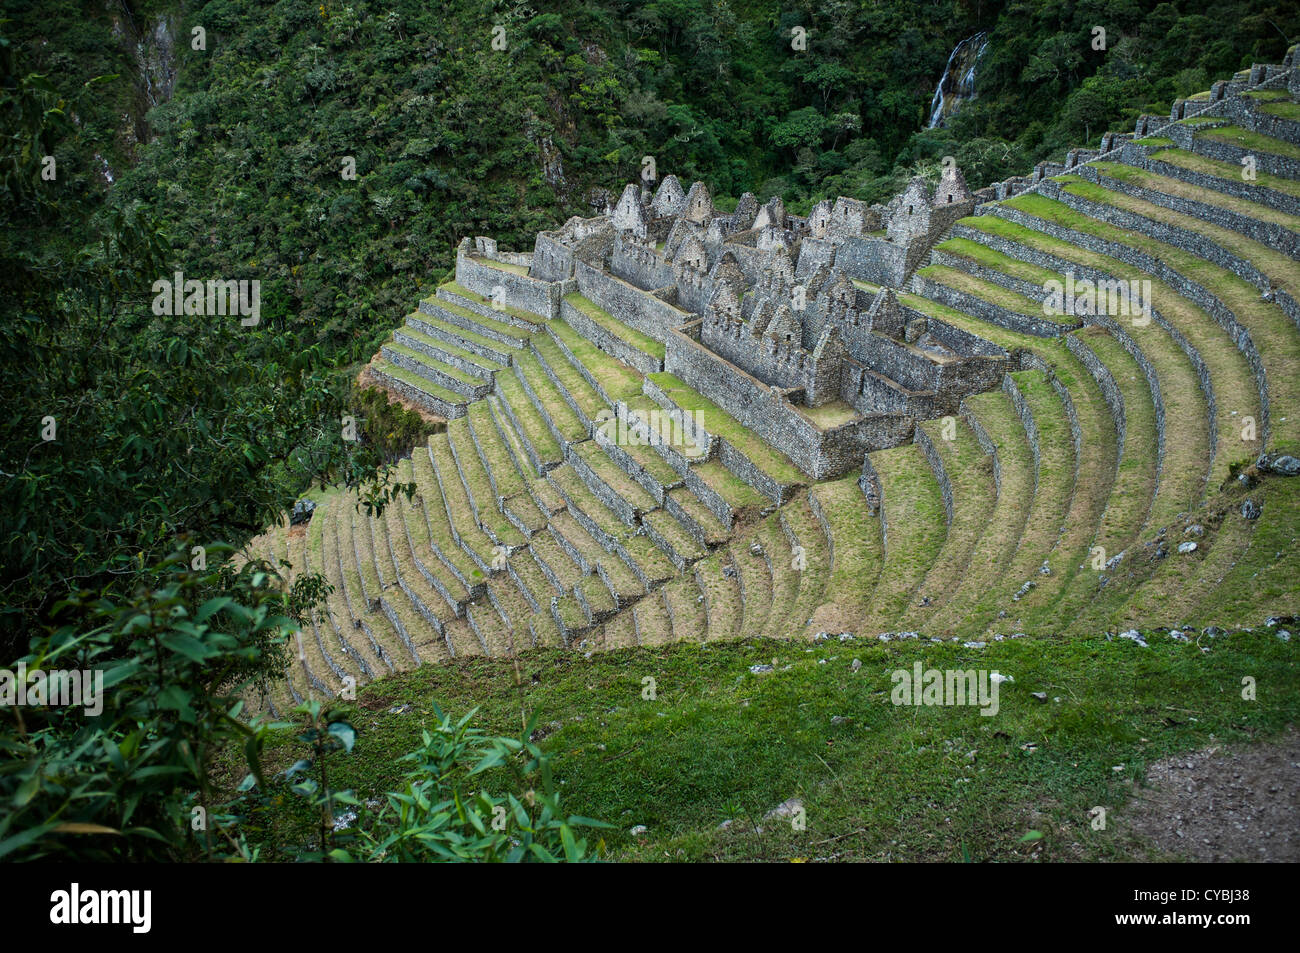 Inca Terraces and the ruins at Winay Wayna. The Inca Trail on the way to Maccu Picchu. Peru. Stock Photo